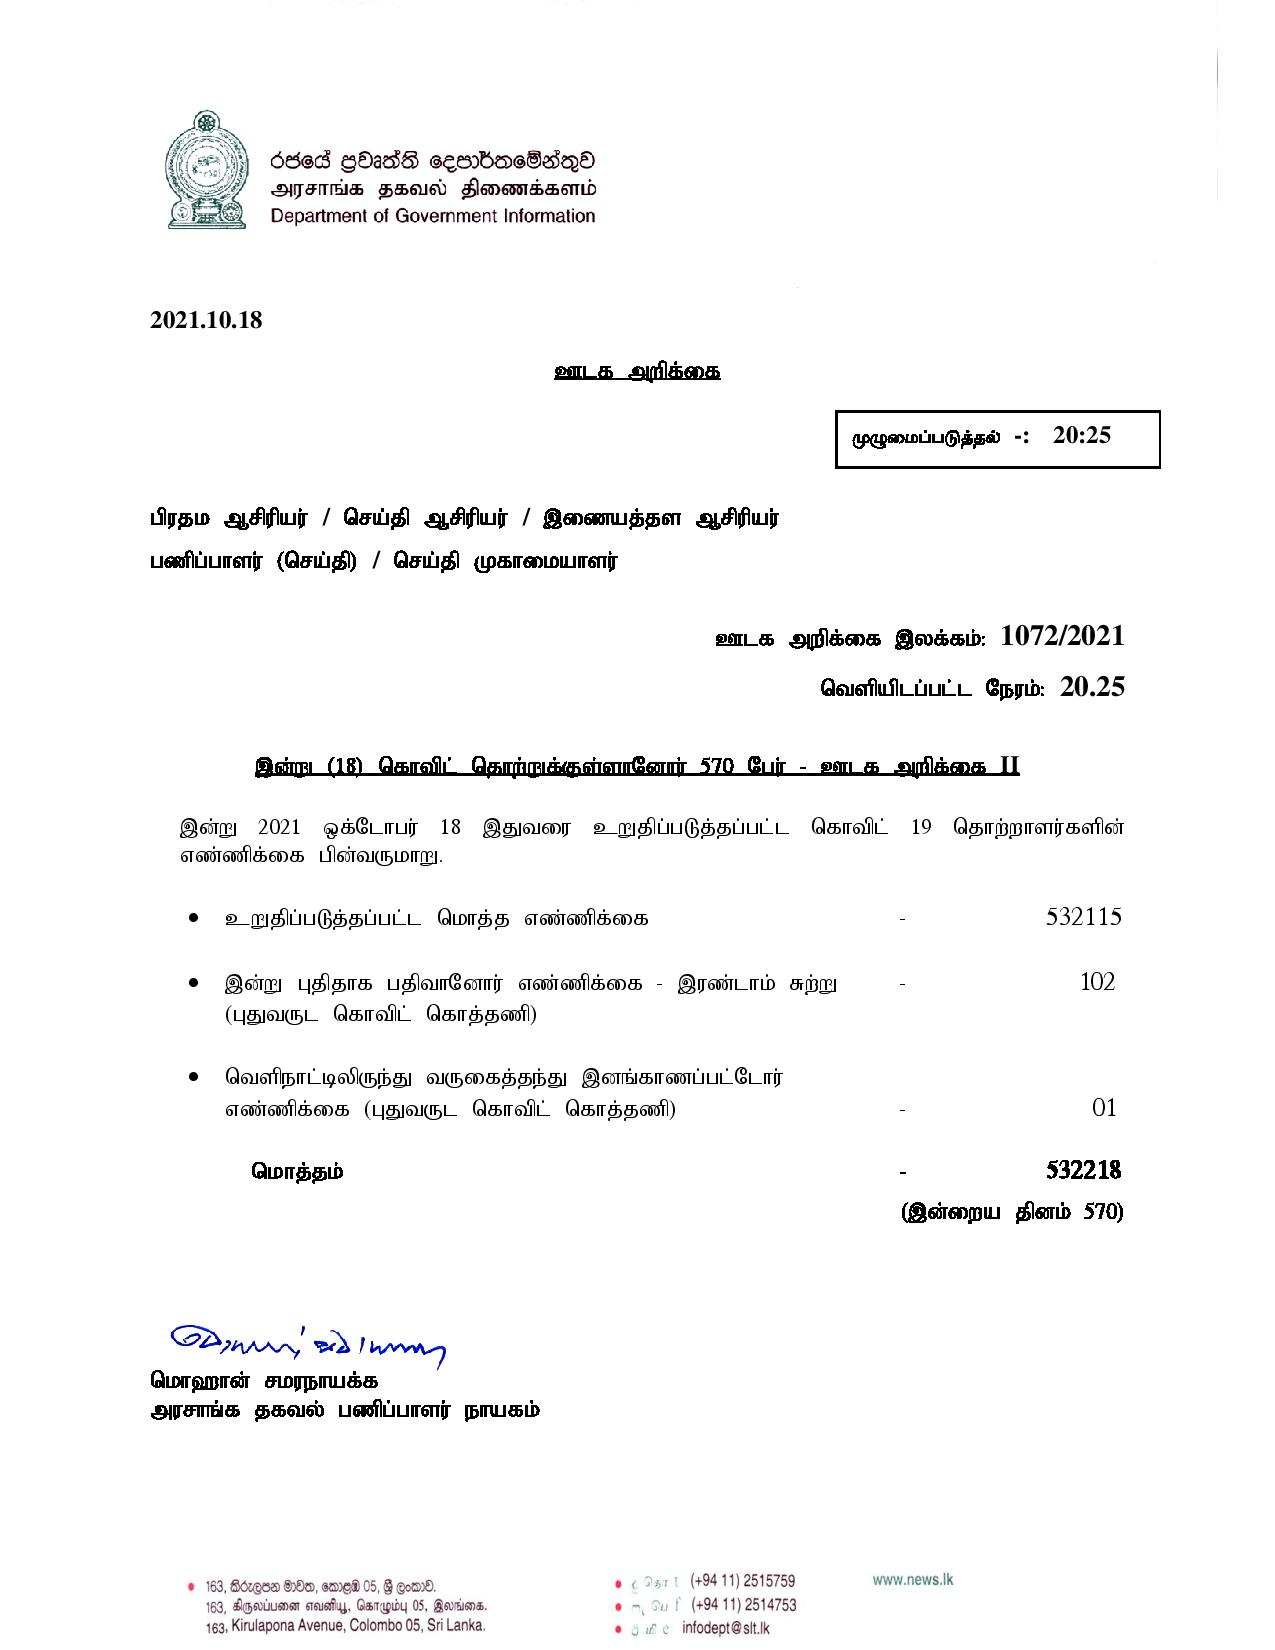 Press Release 1072 Tamil page 001